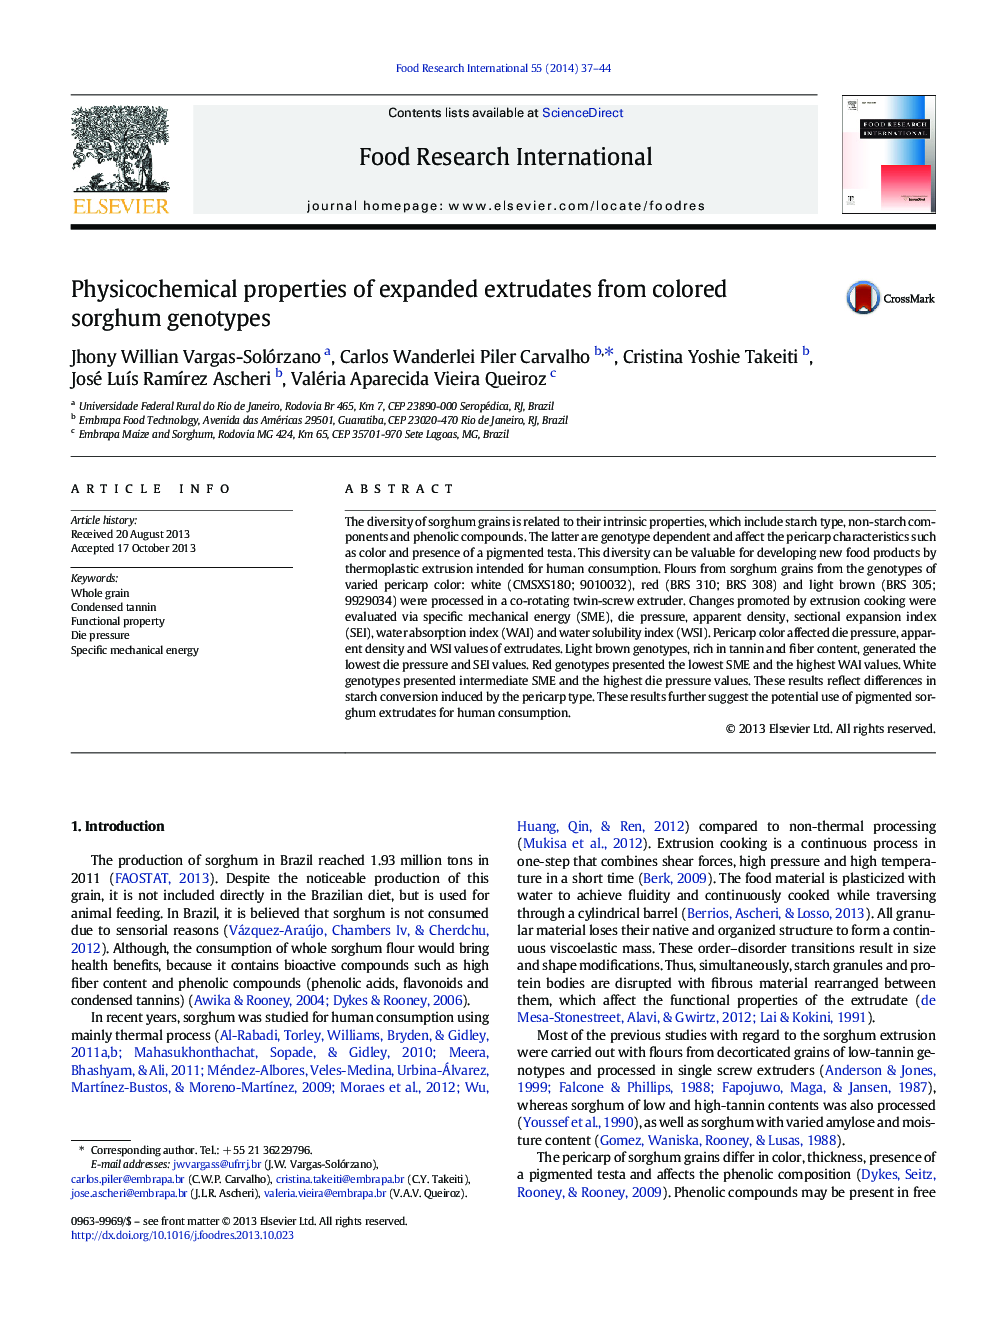 Physicochemical properties of expanded extrudates from colored sorghum genotypes